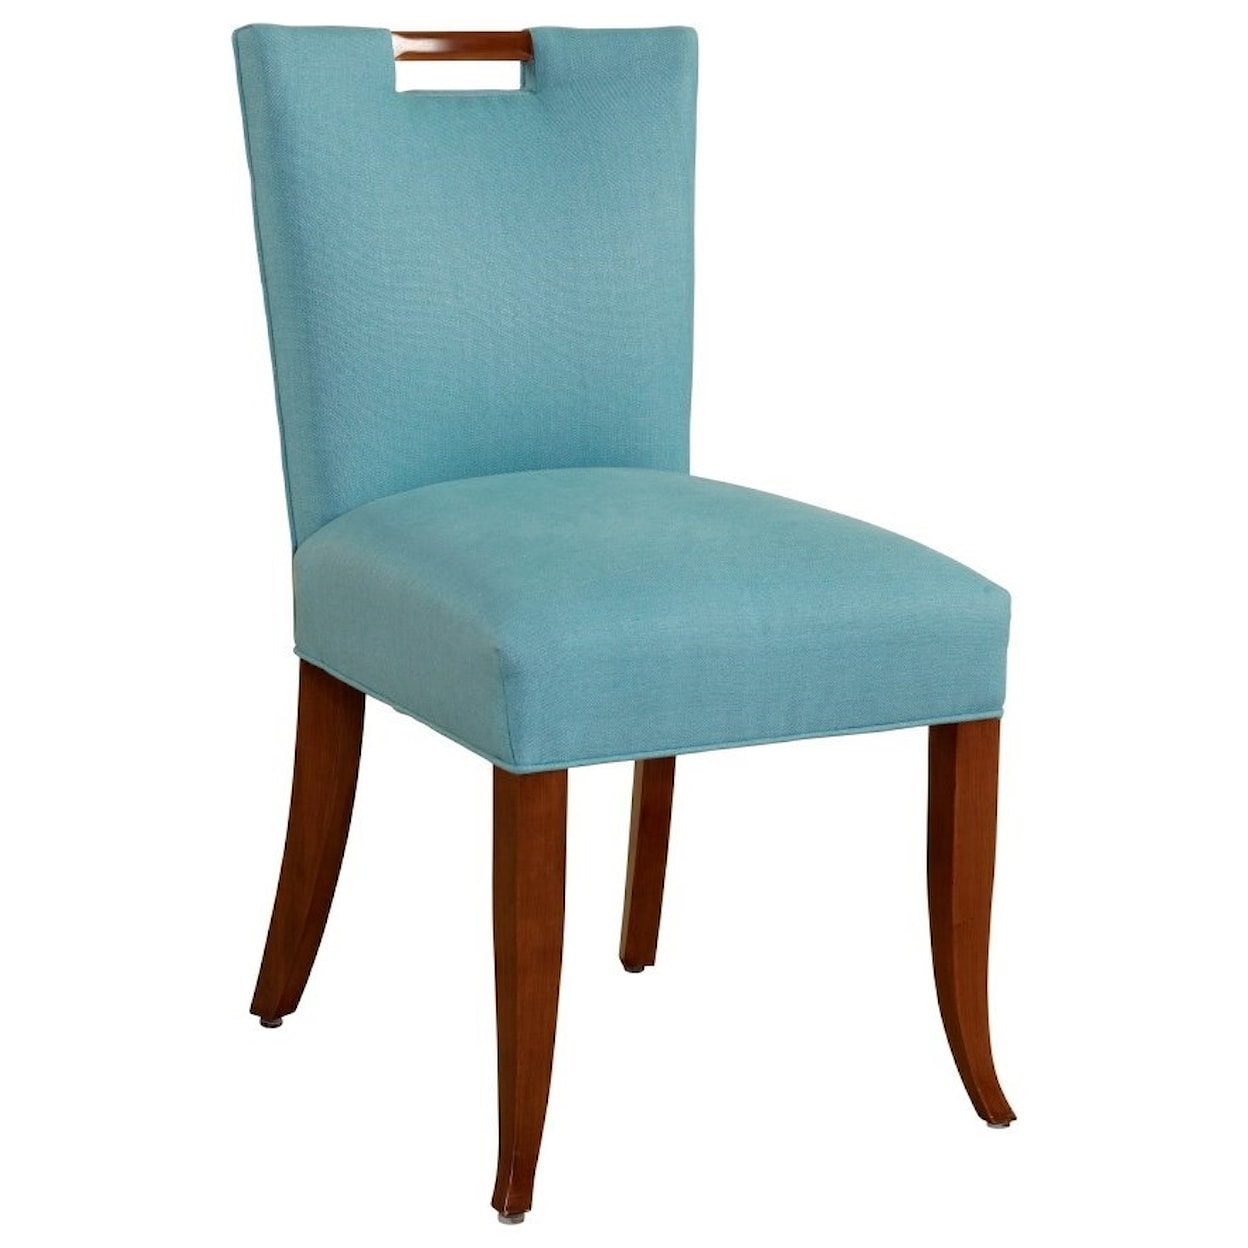 Designmaster Chairs  Darby Studio Side Chair